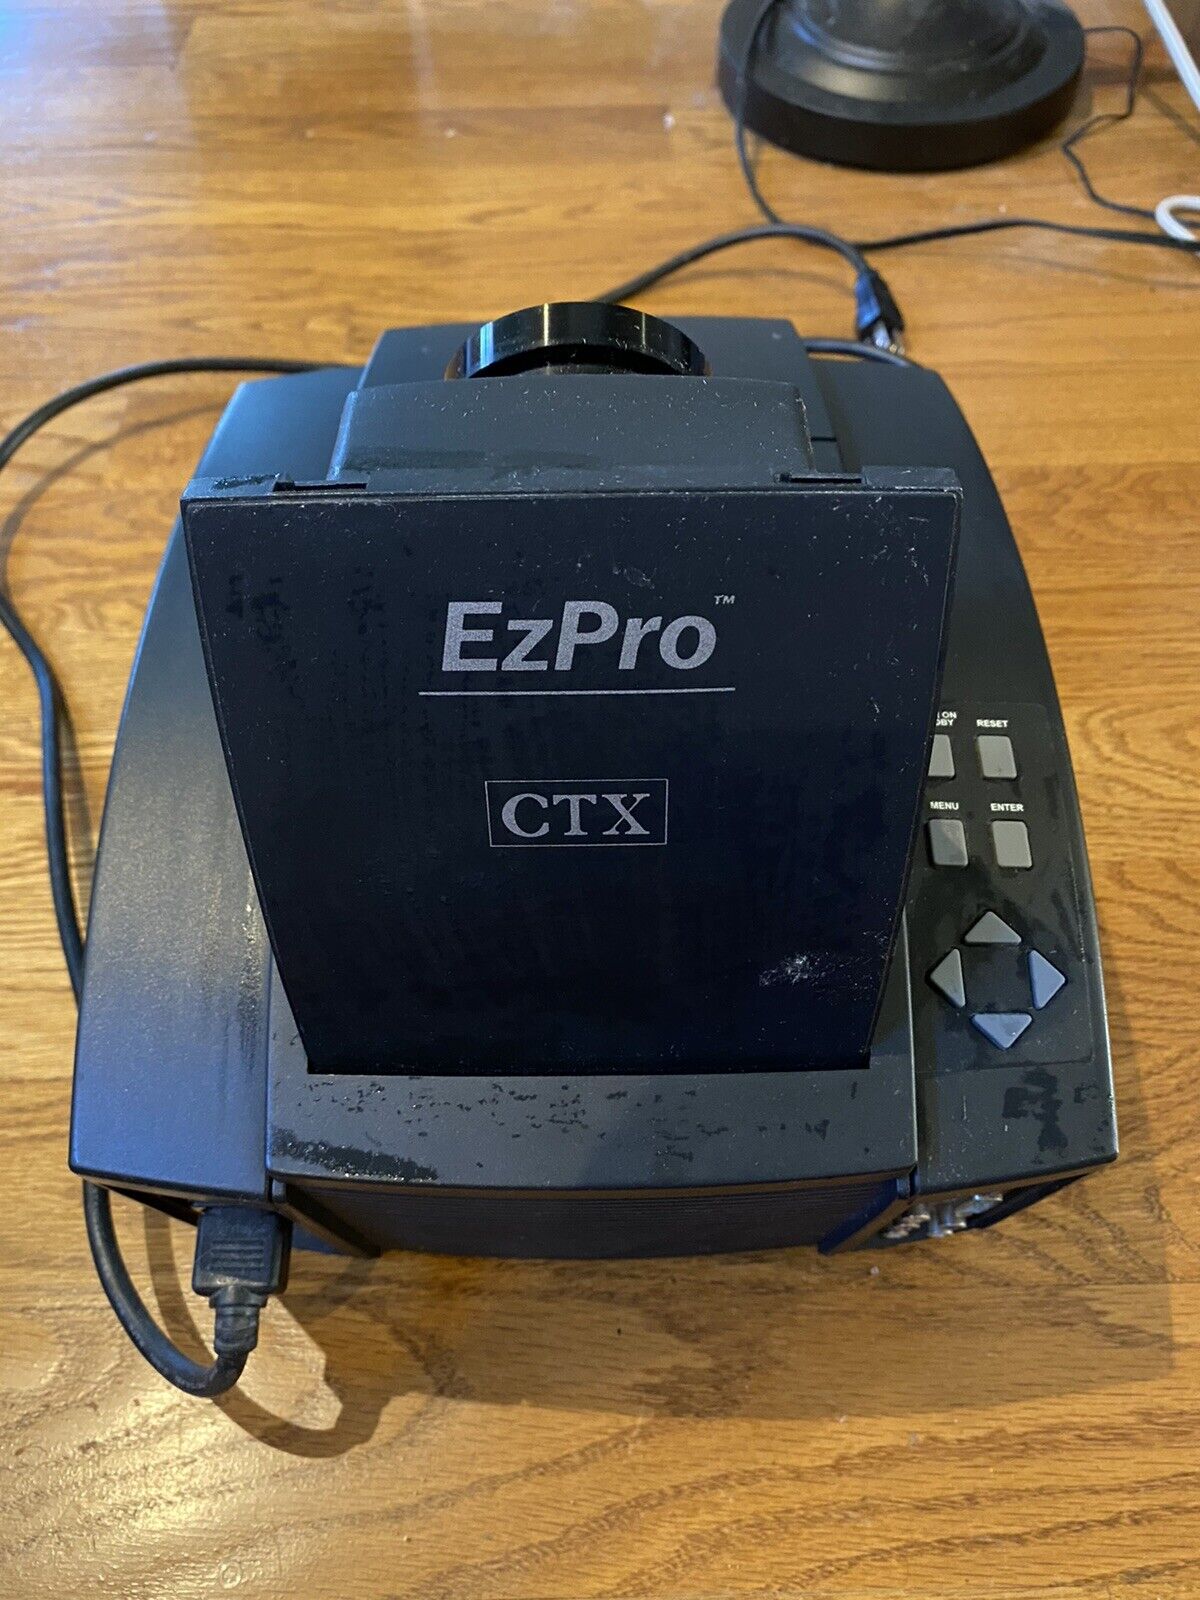 CTX EzPro 550 LCD Projector. Cleaning house, make offer